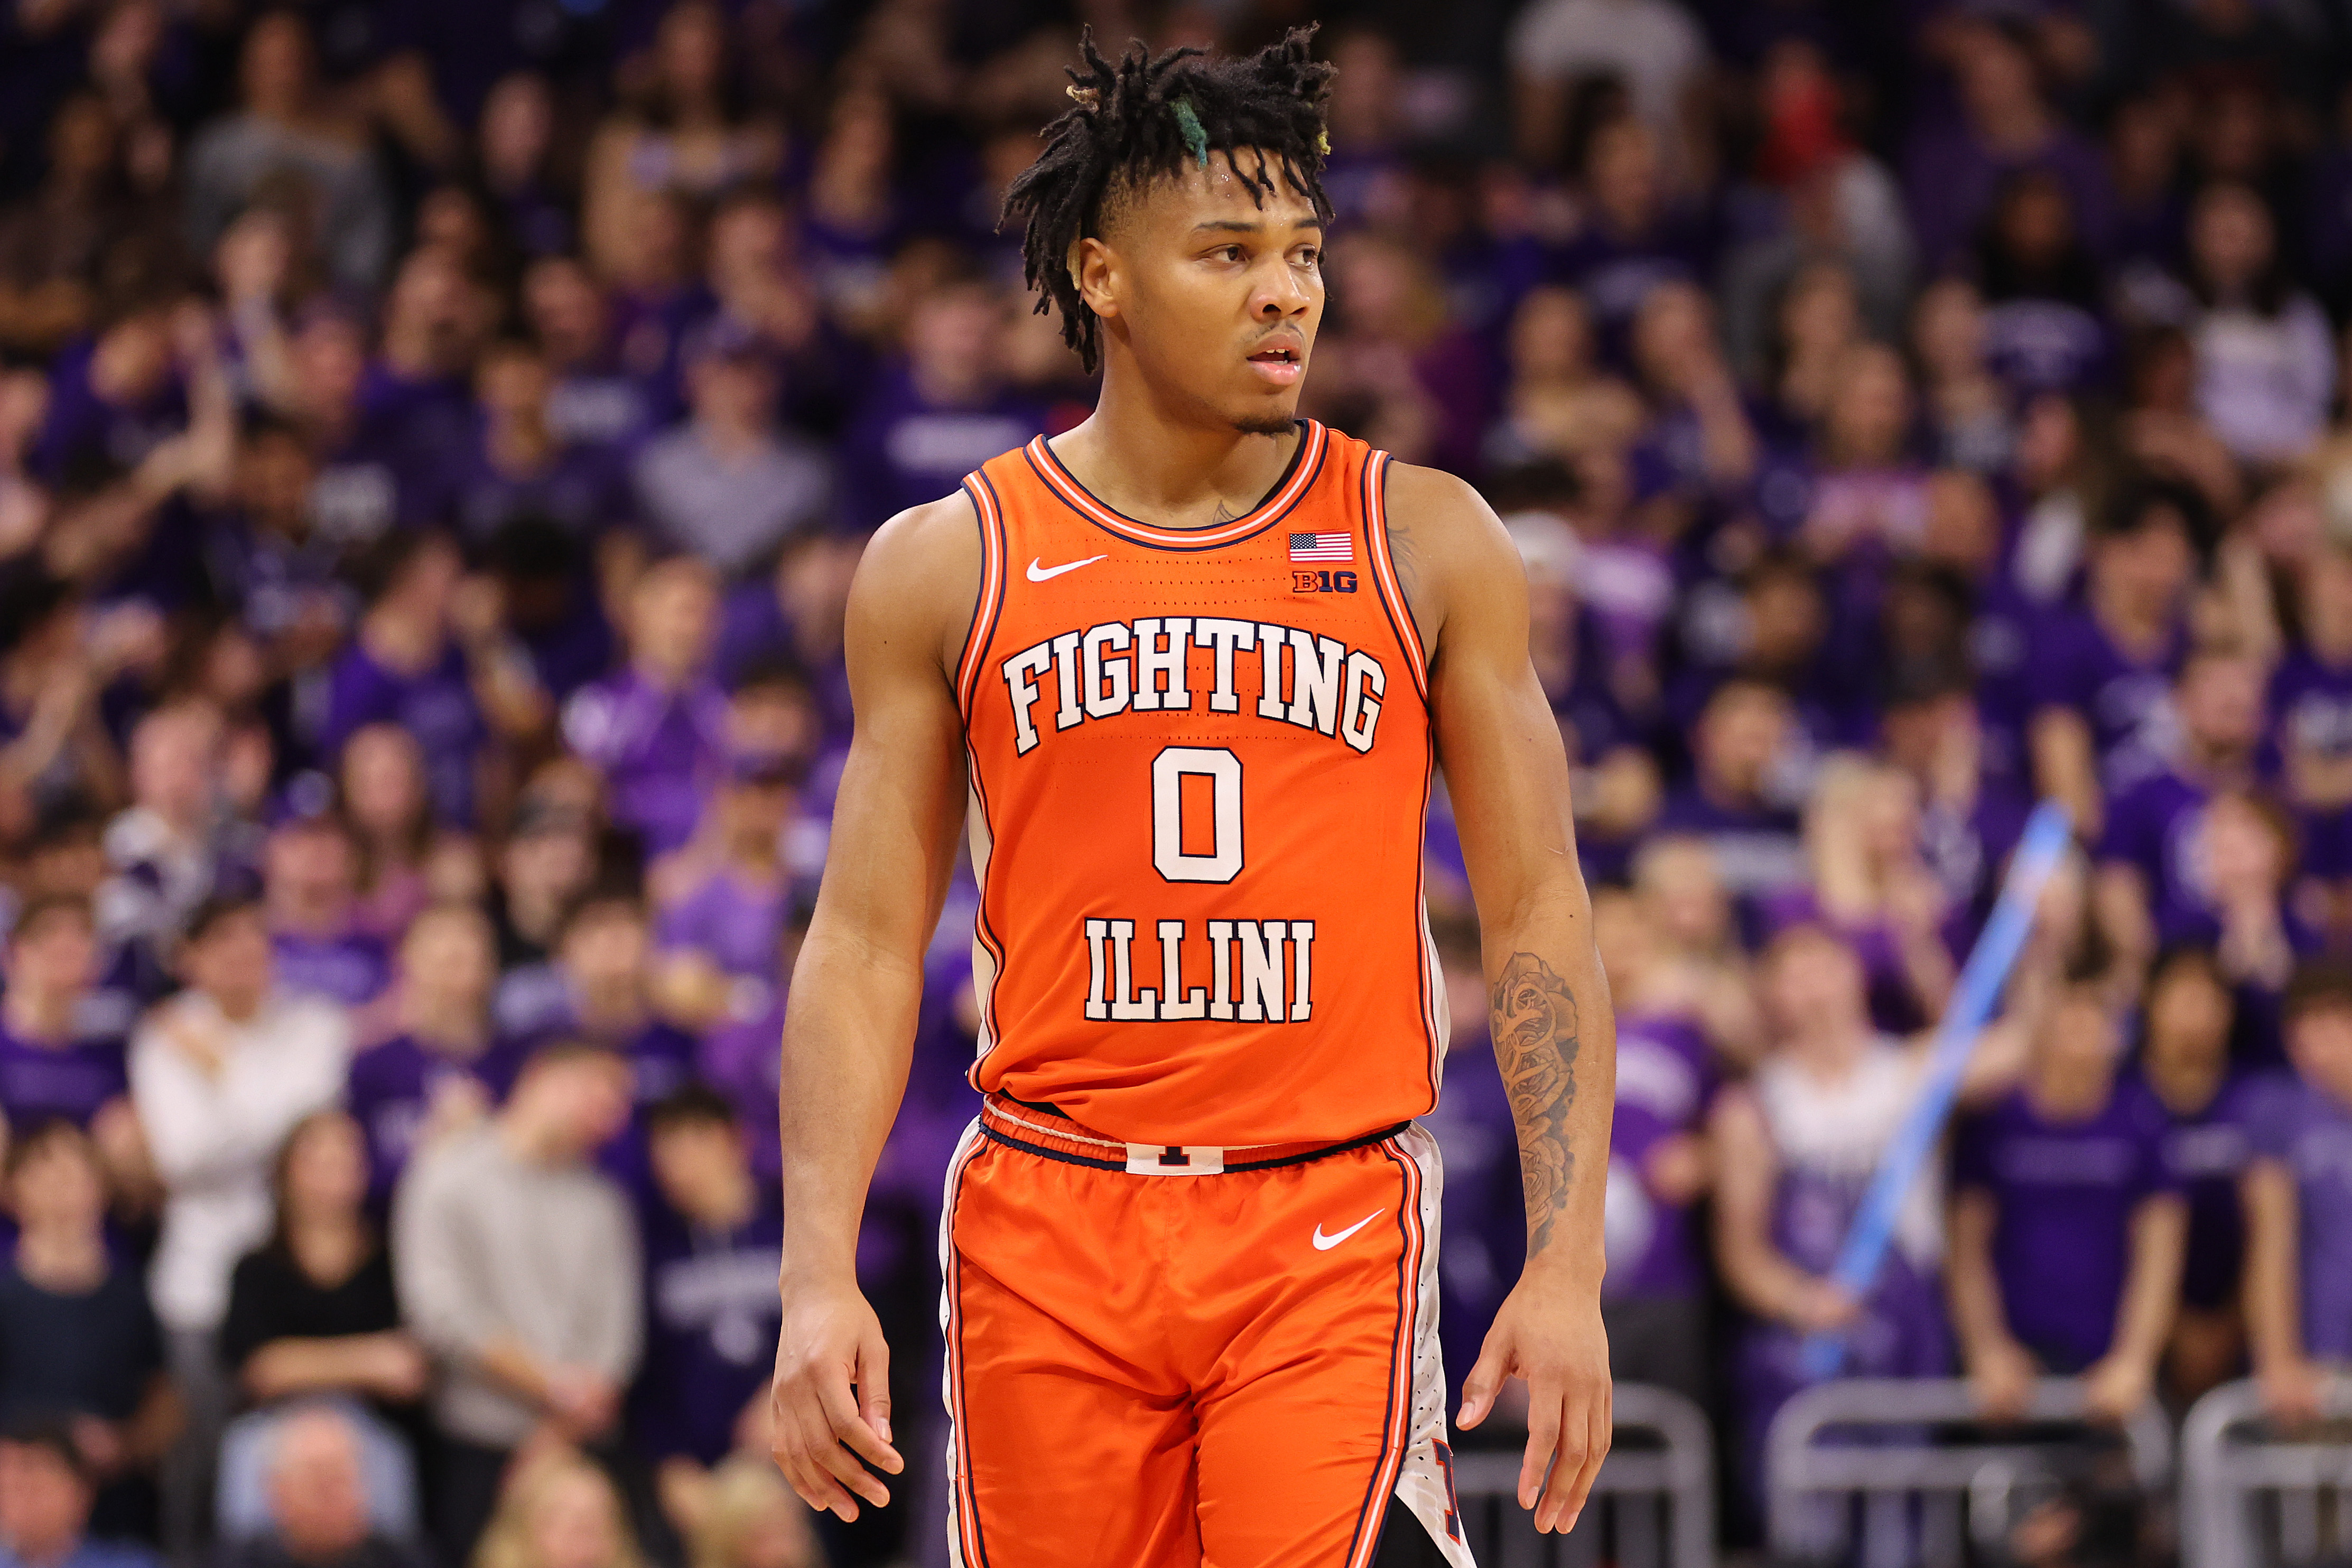 Illinois' Terrence Shannon Jr. during a game at Northwestern during which Wildcats fans chanted, "No means no!"